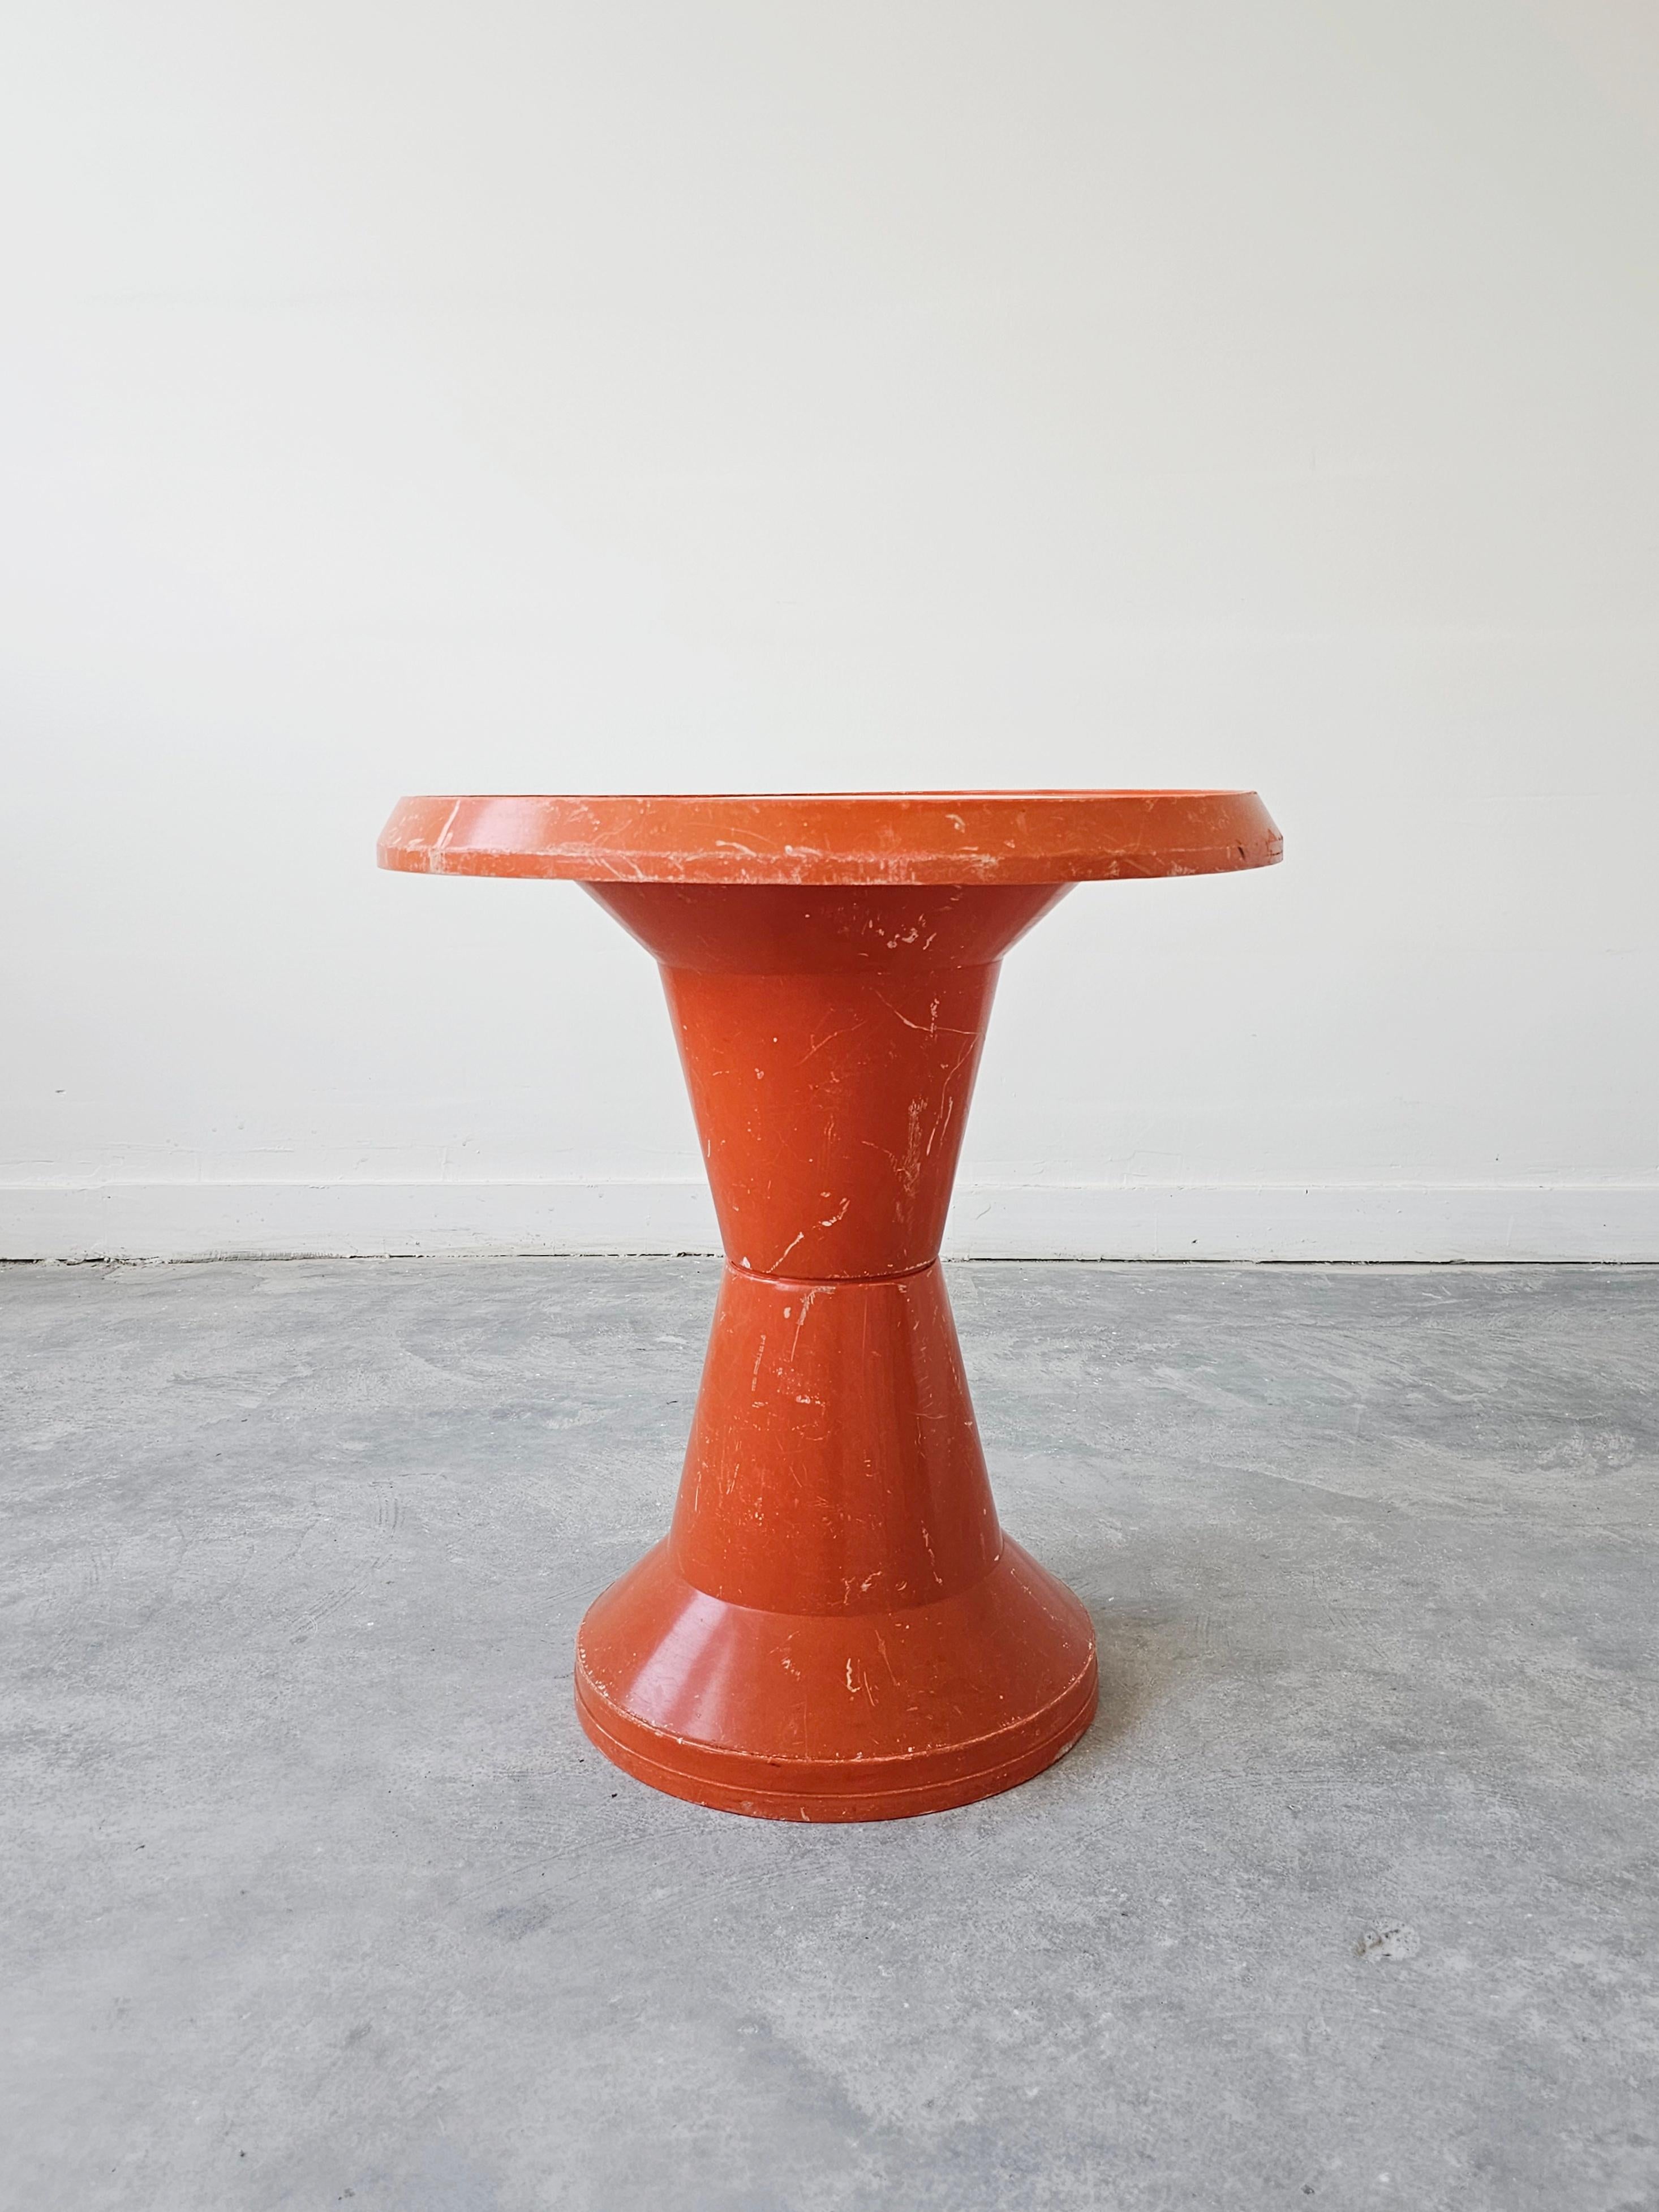 In this listing you will find a Space Age Plastic garden table manufactured by Kovinoplastika. The model is called Diablo and it comes in bright orange color. Made in Yugoslavia in 1970s.

Good vintage condition with signs of time and use, such as